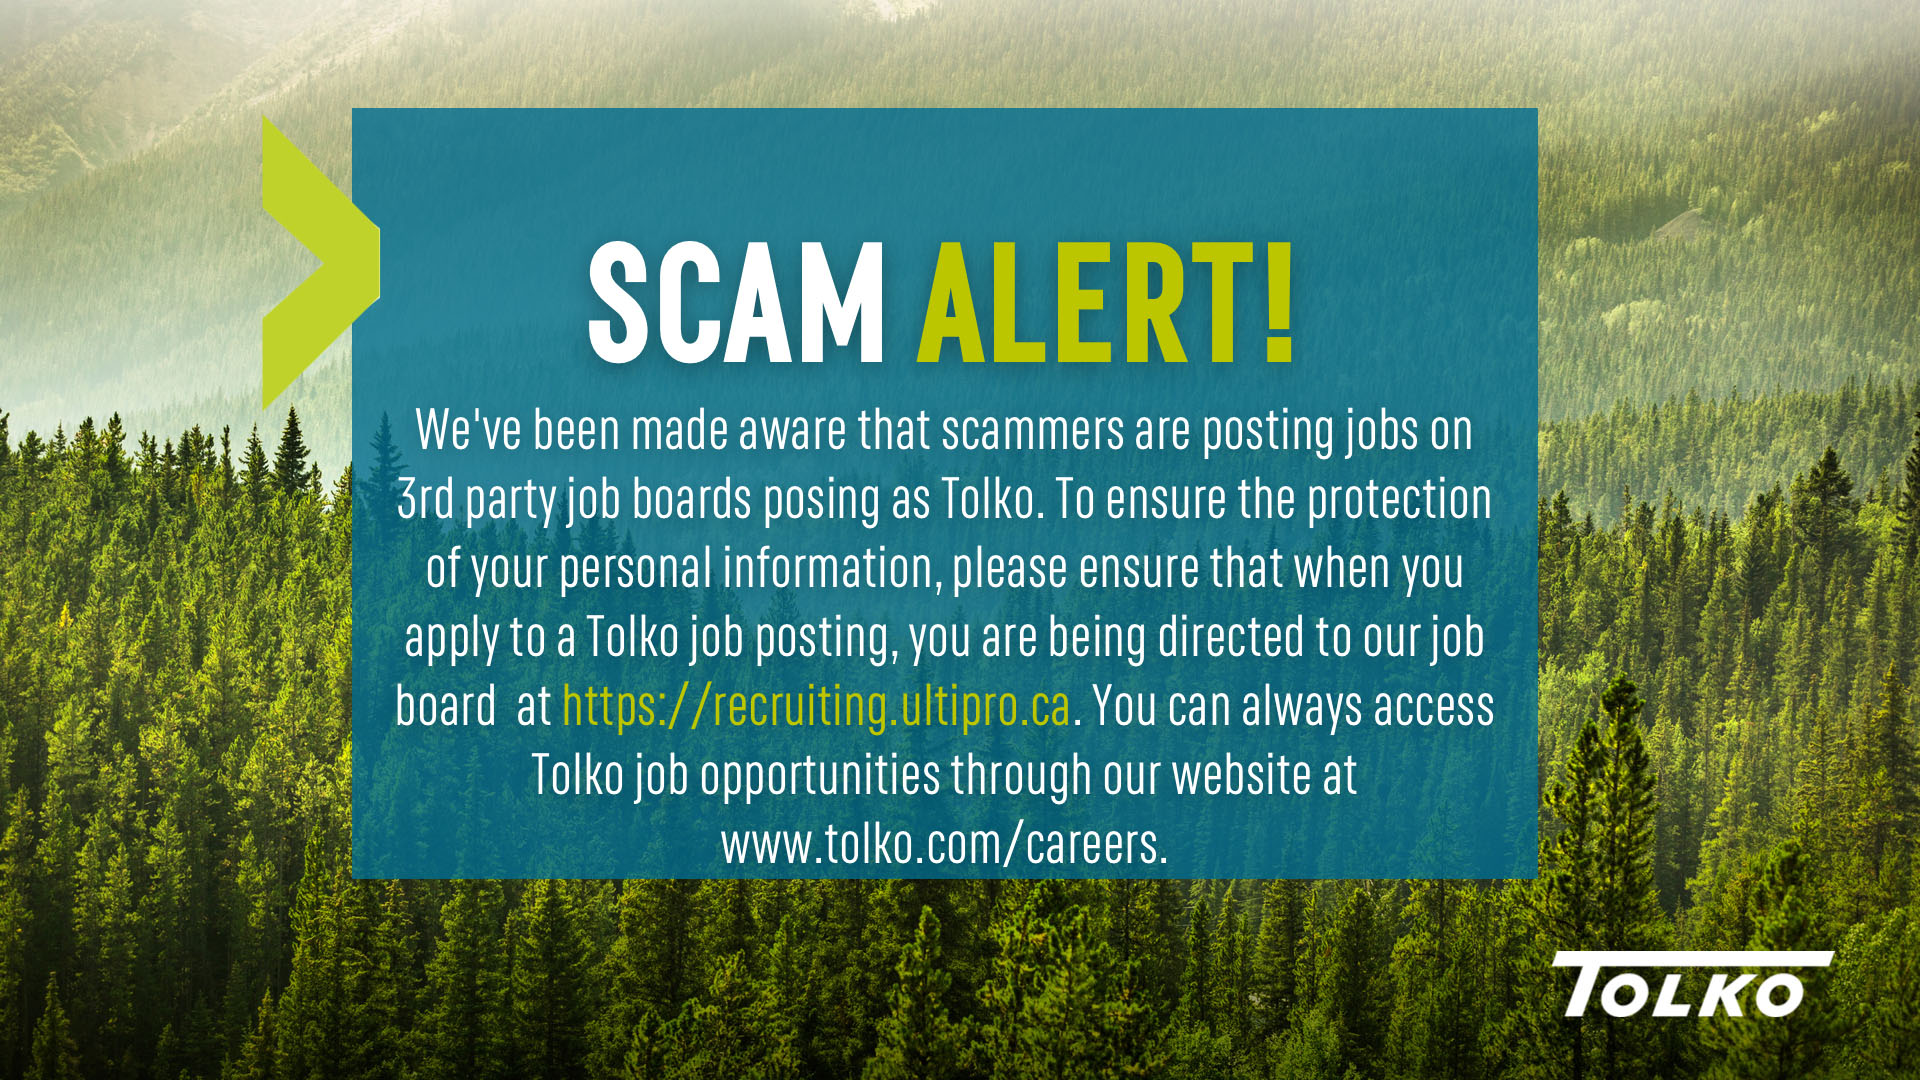 Scam Alert! Ensure that you are applying to Tolko jobs at https://recruiting.ultipro.ca